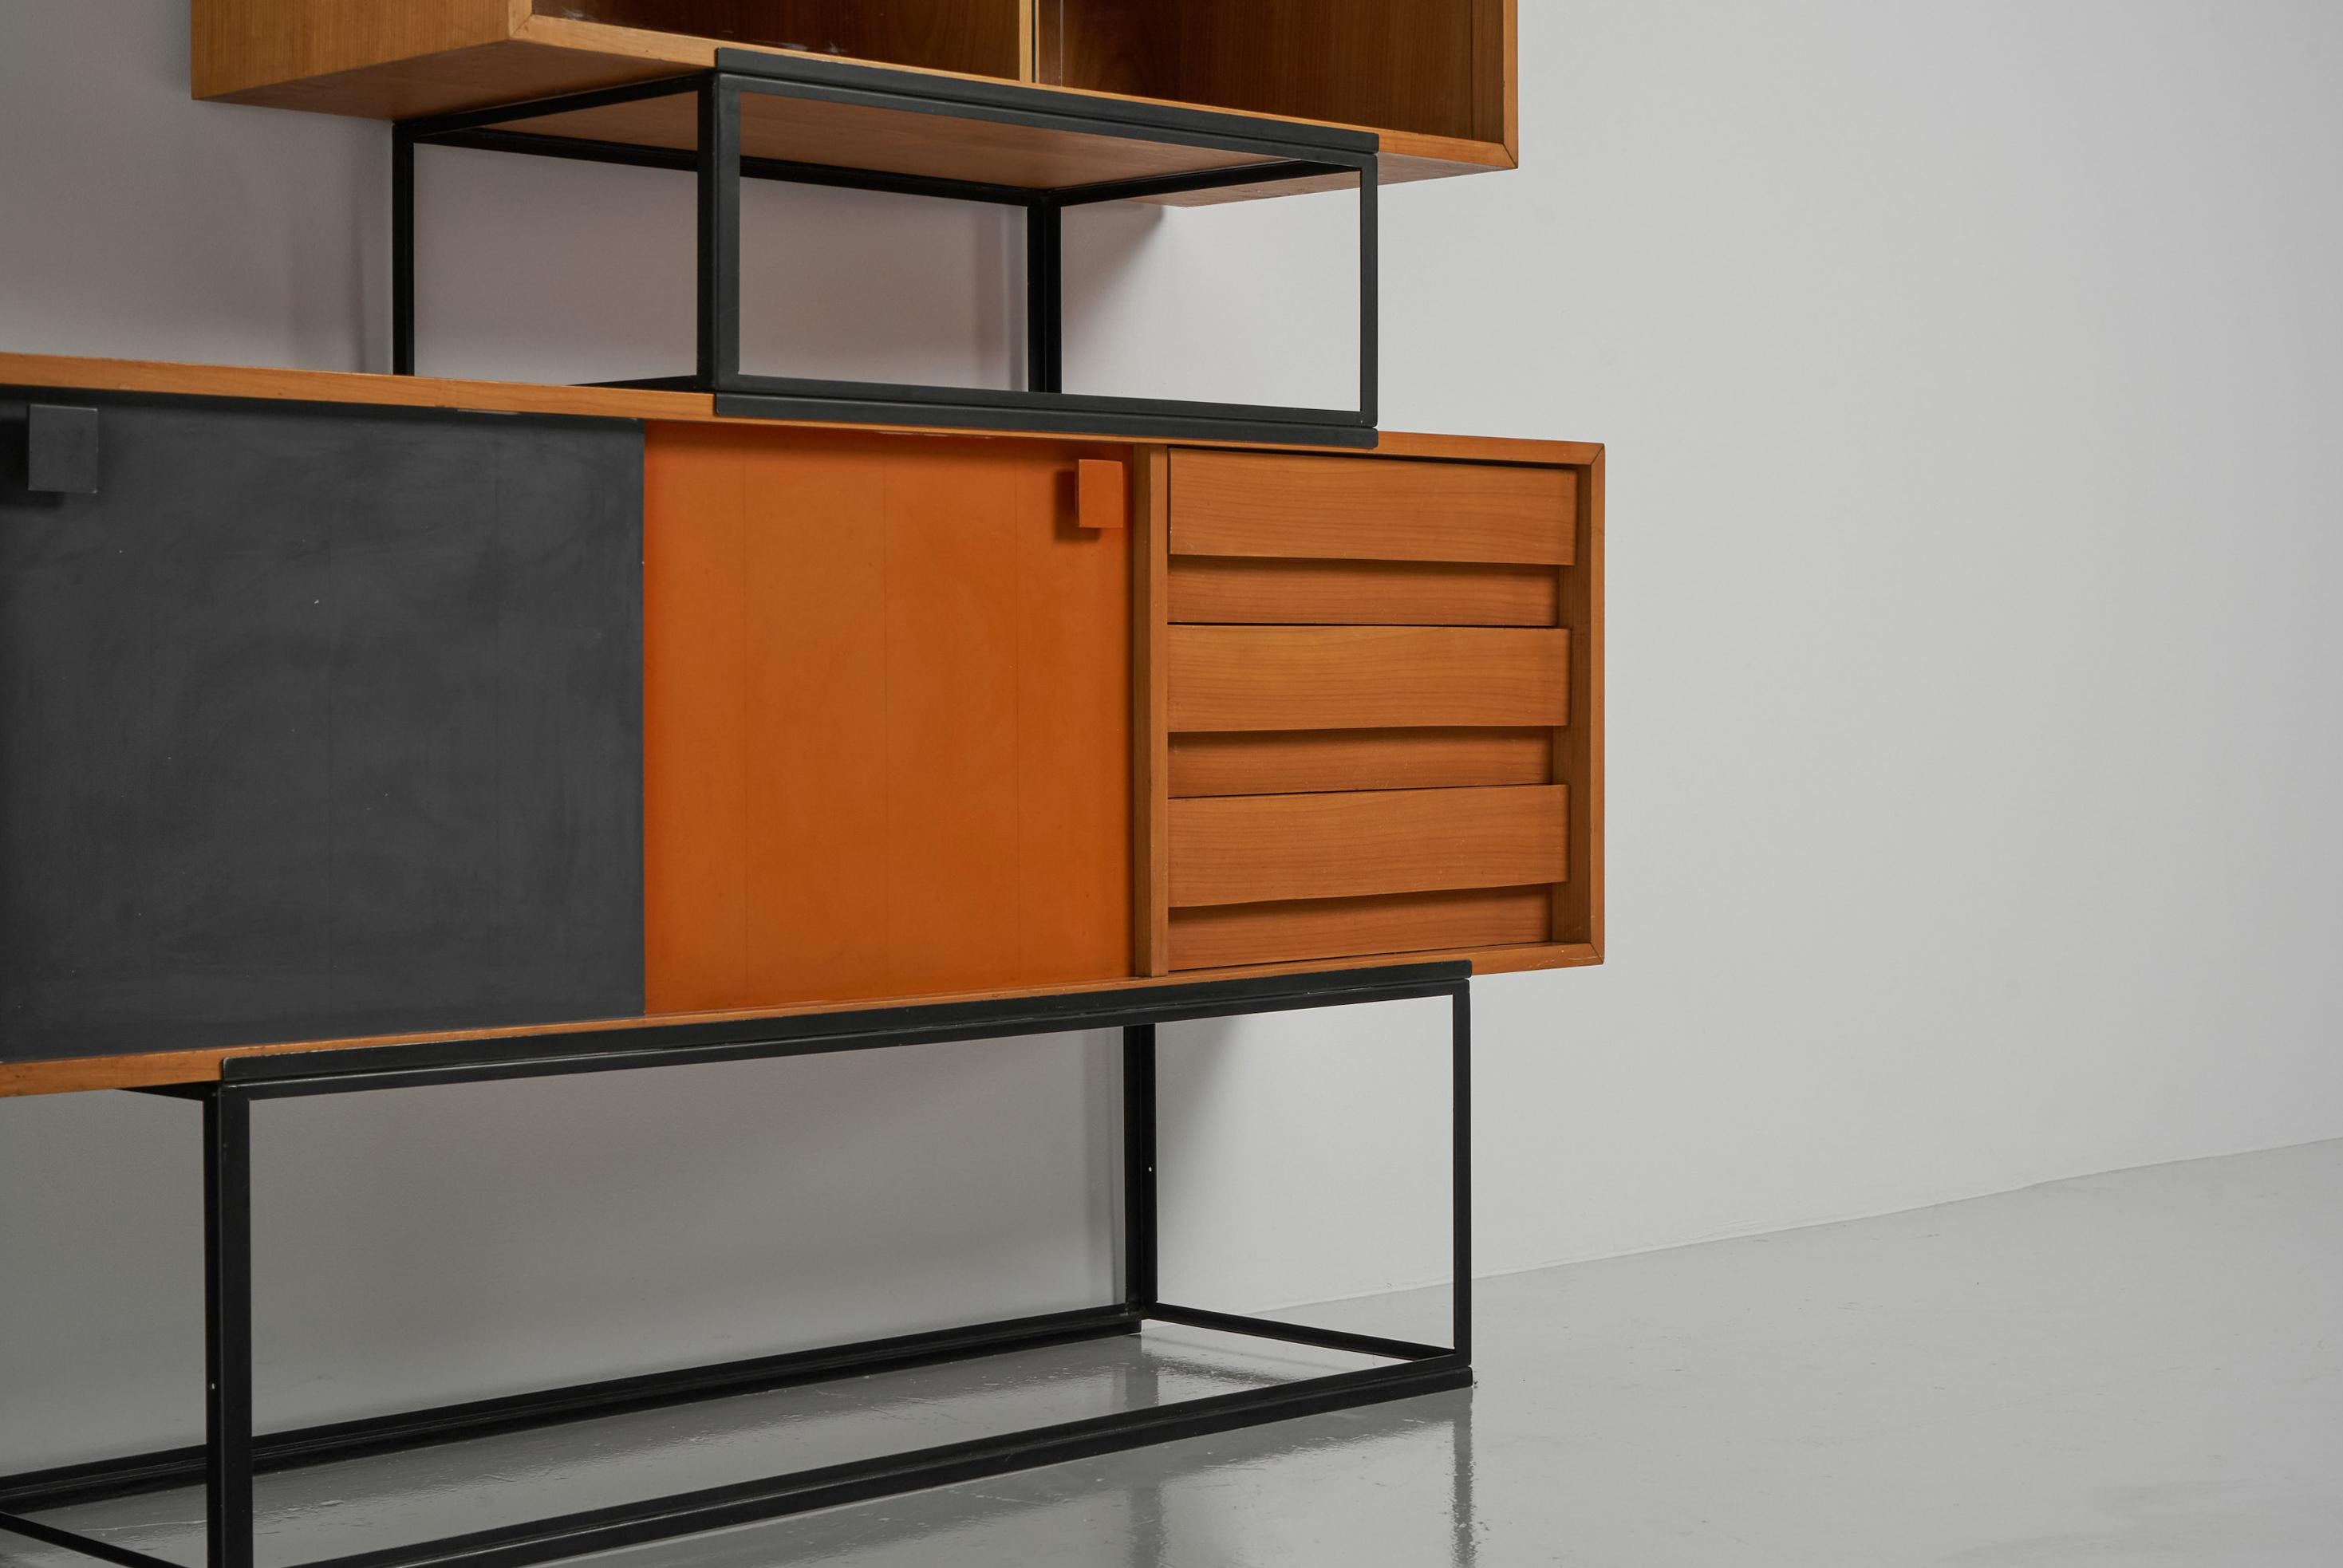 Rare set of 2 modular cabinets designed by Bernard Marange and manufactured by NF Meubles, France 1960. These cabinets are made in the blooming French minimalism period. Where many important designers reinvented the modernism. This typical set of